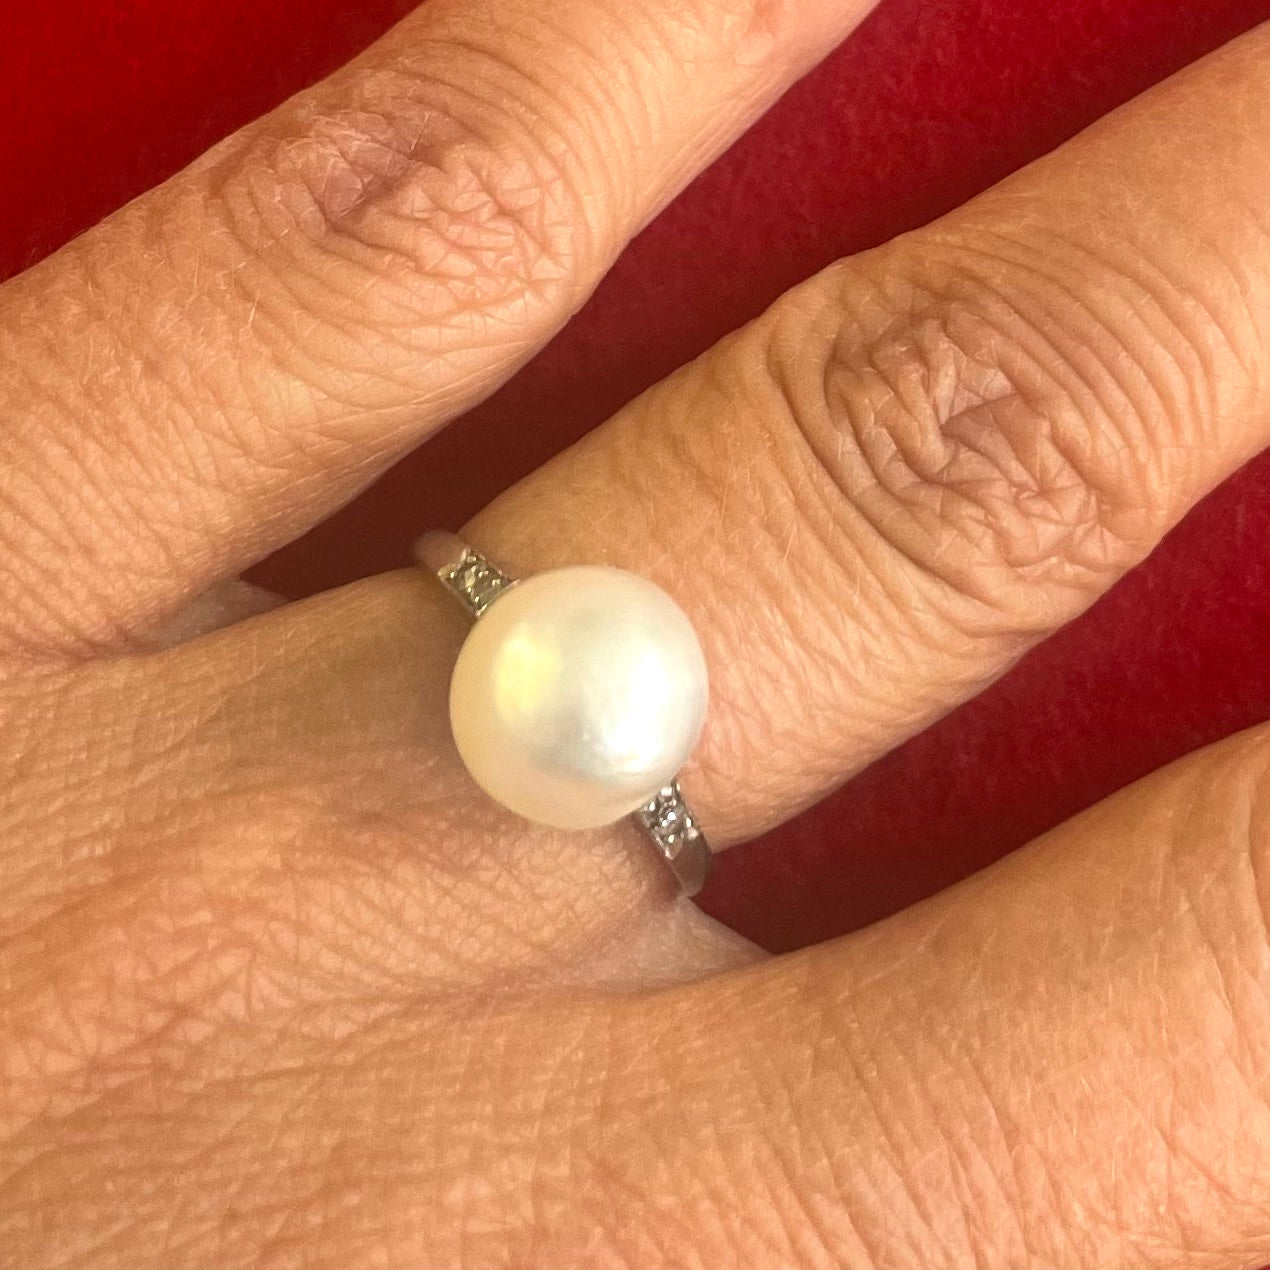 French Edwardian Platinum Natural Pearl & Diamond Ring on finger